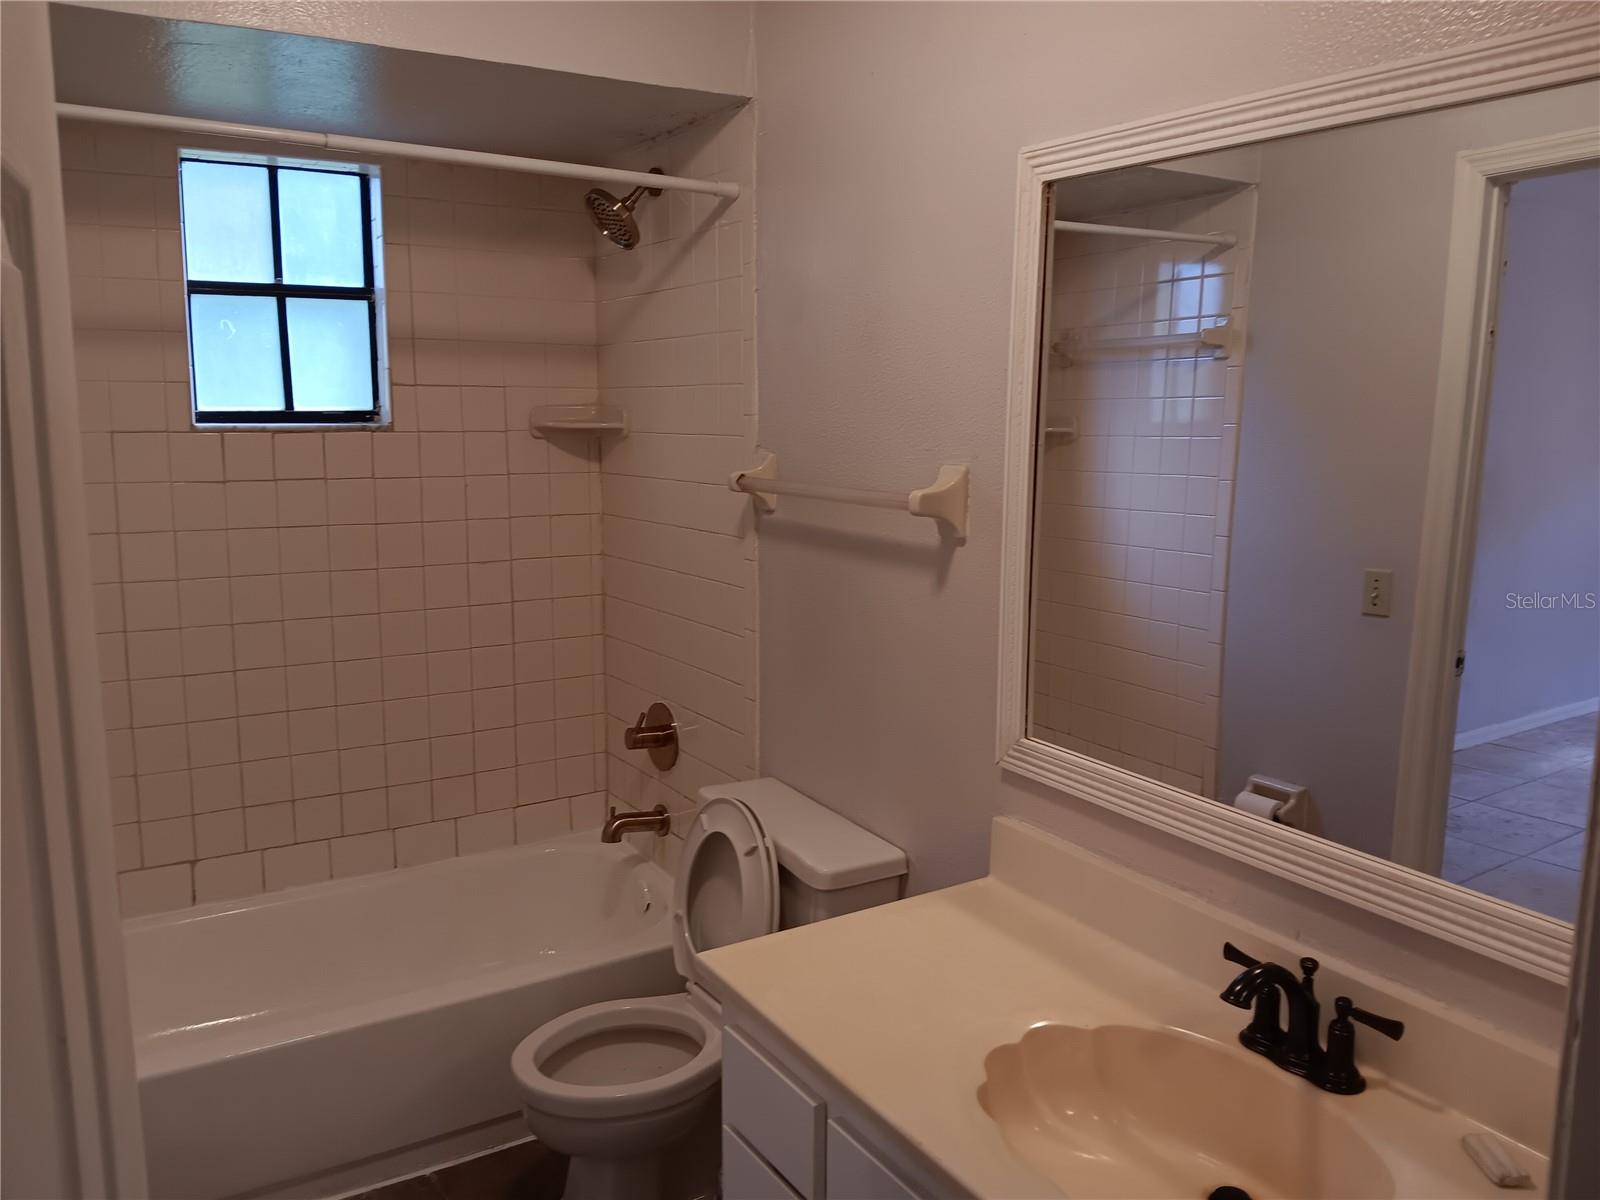 bathroom with all new plumbing fixtures and framed mirror...